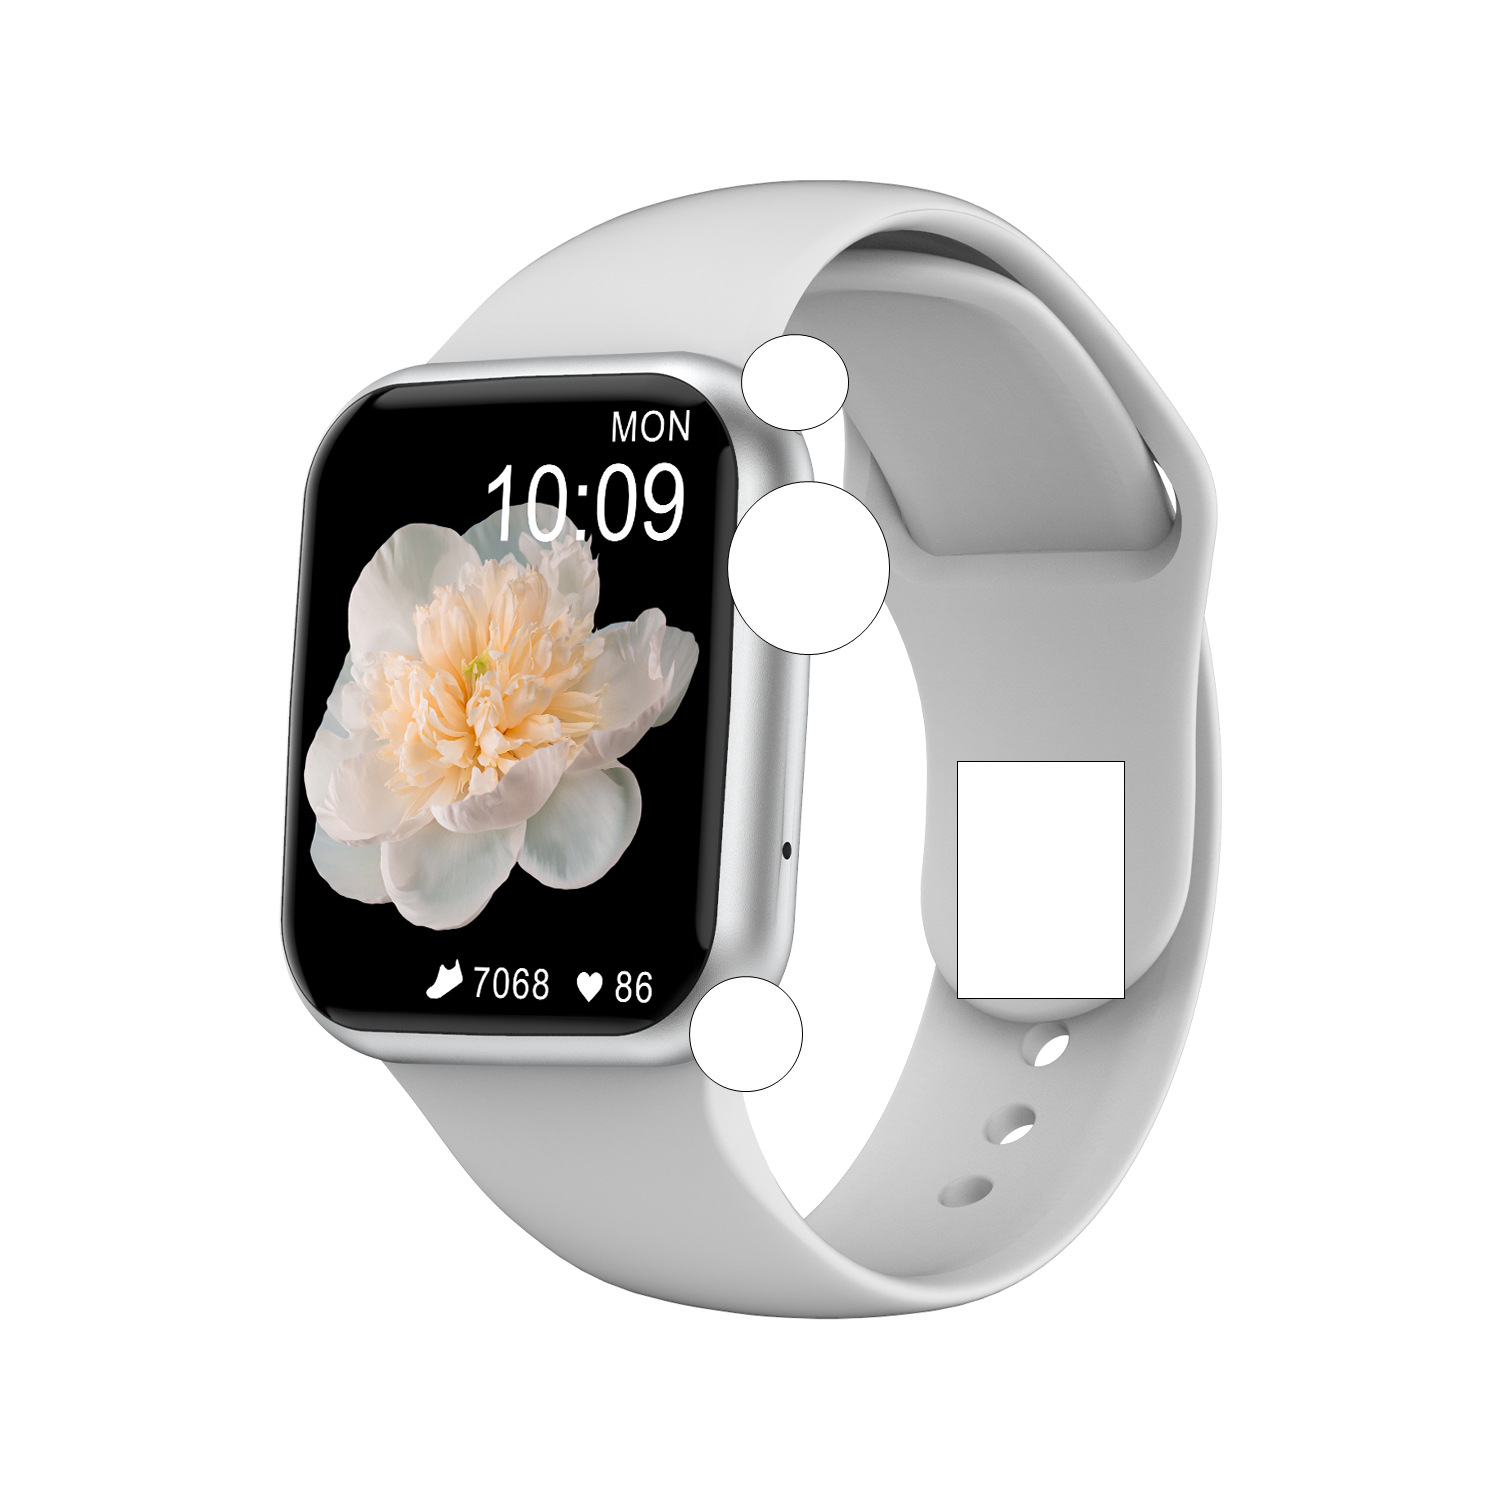 Smart Watch Bluetooth Hd Full-screen Android/ios